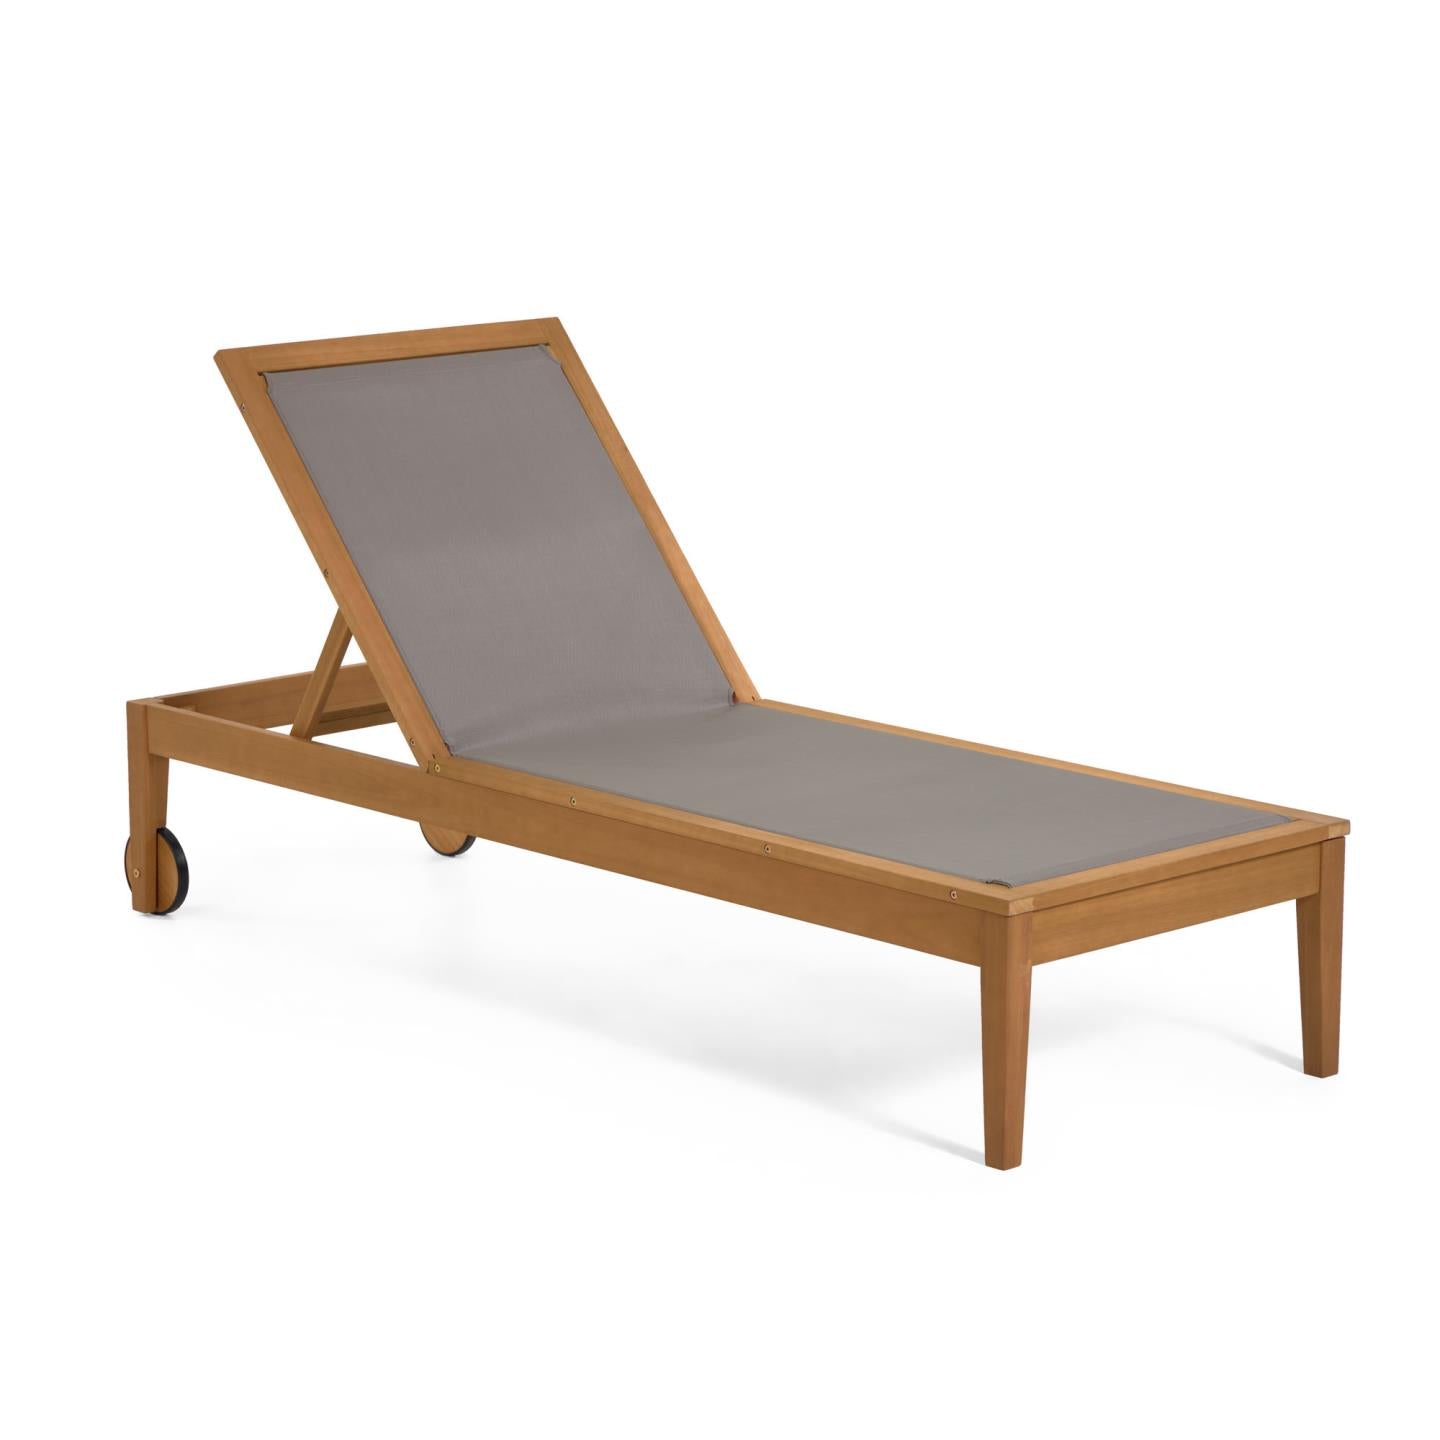 Caterin solid eucalyptus wood outdoor sun lounger in green, 100% FSC